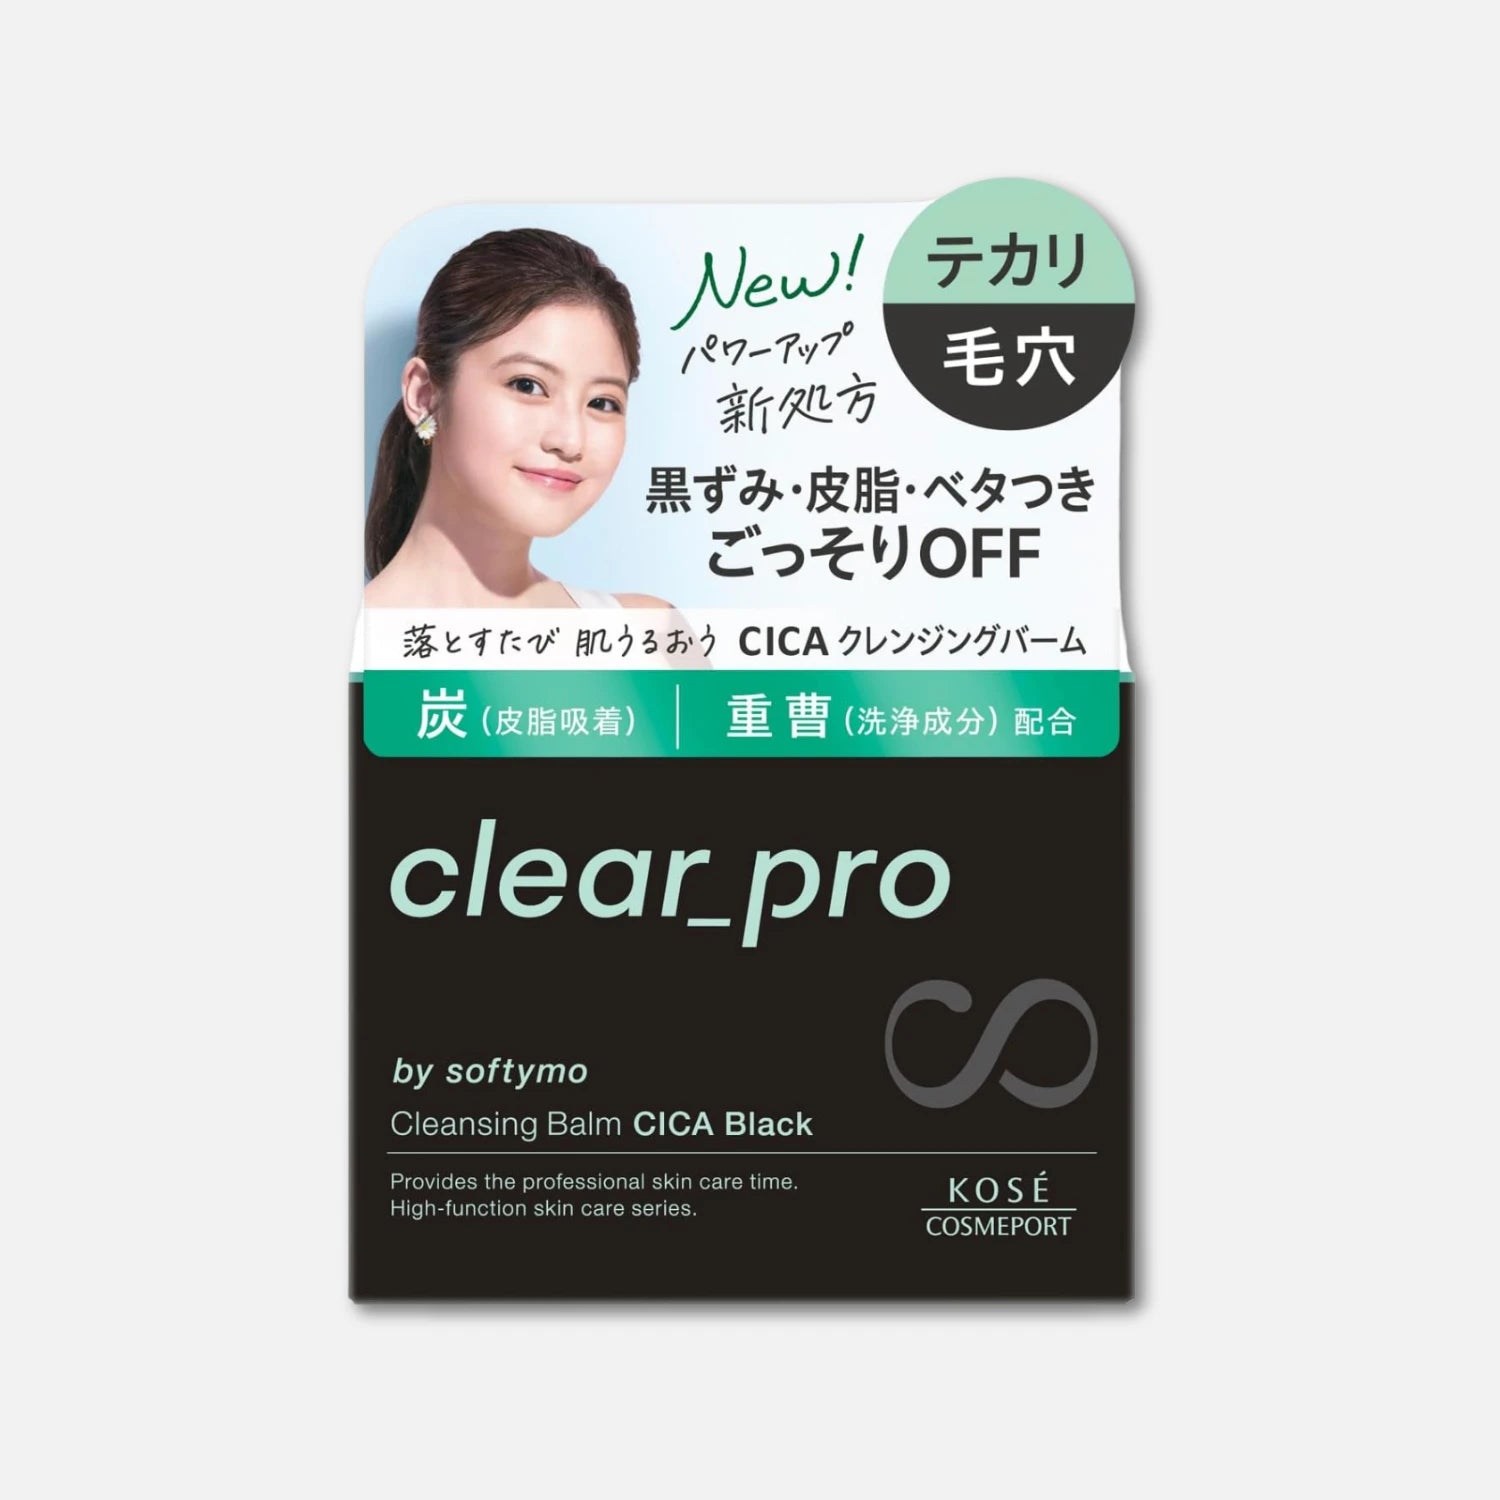 Kose Clear Pro Cleansing Balm CICA Black 90g